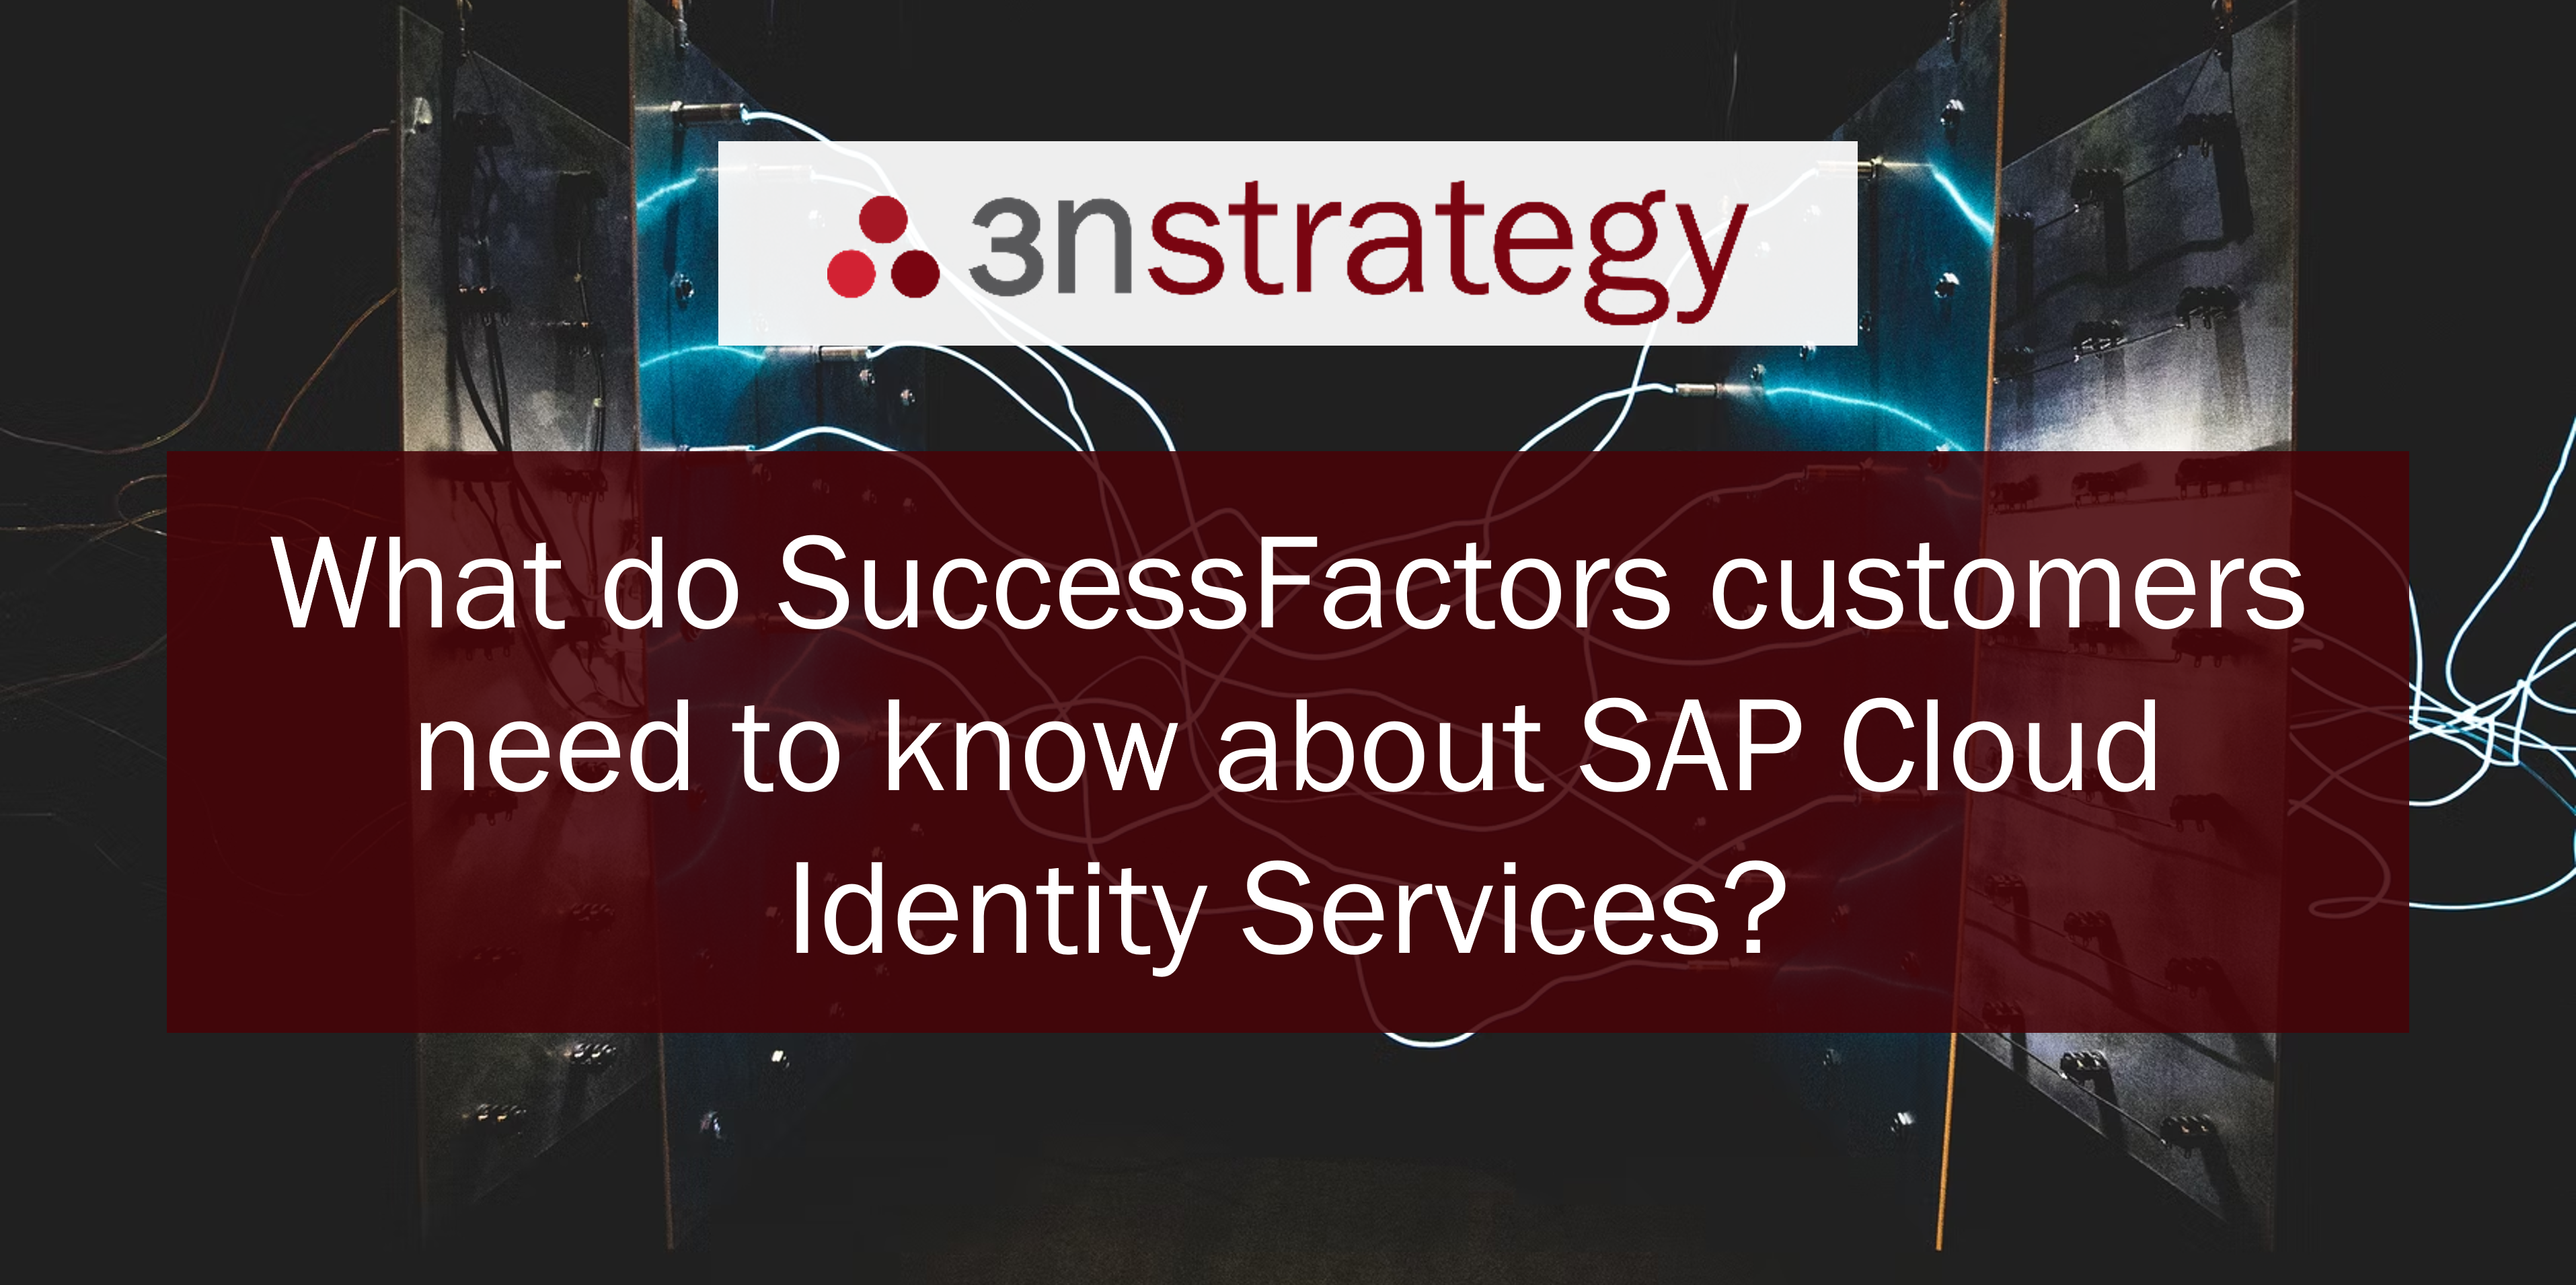 What do SuccessFactors customers need to know about SAP Cloud Identity Services?